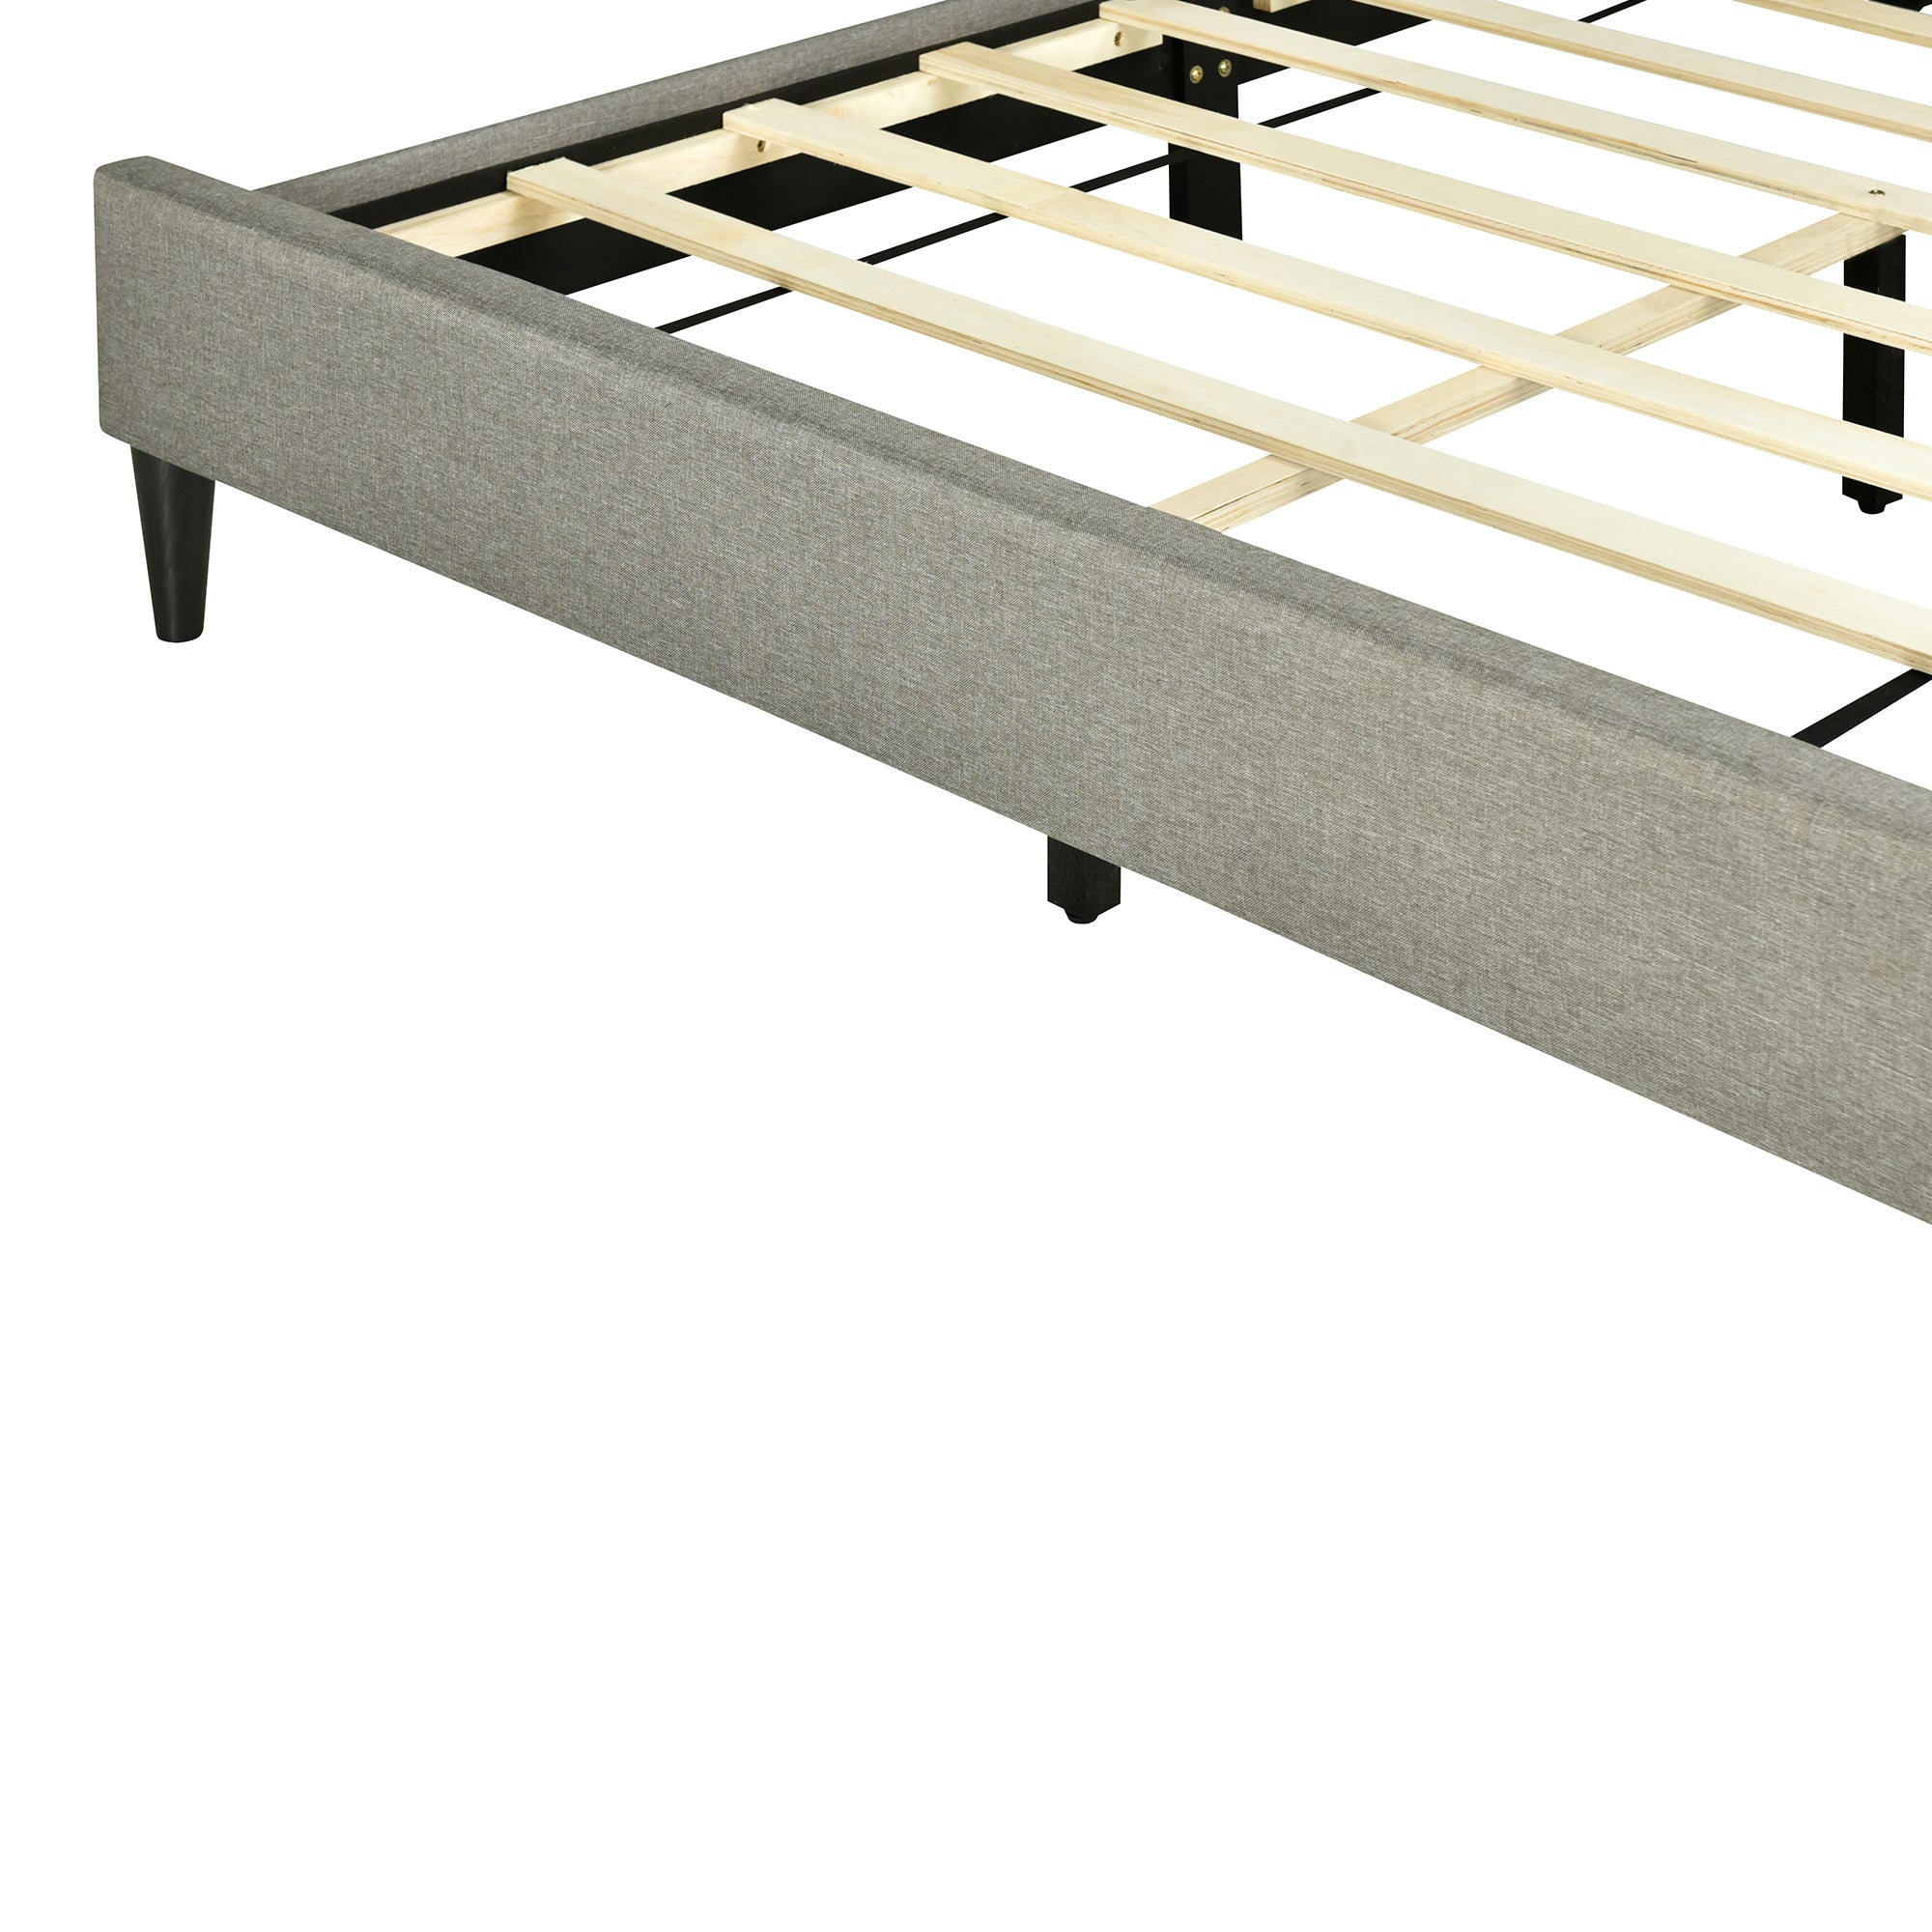 Queen size Upholstered Platform Bed with Storage gray-linen